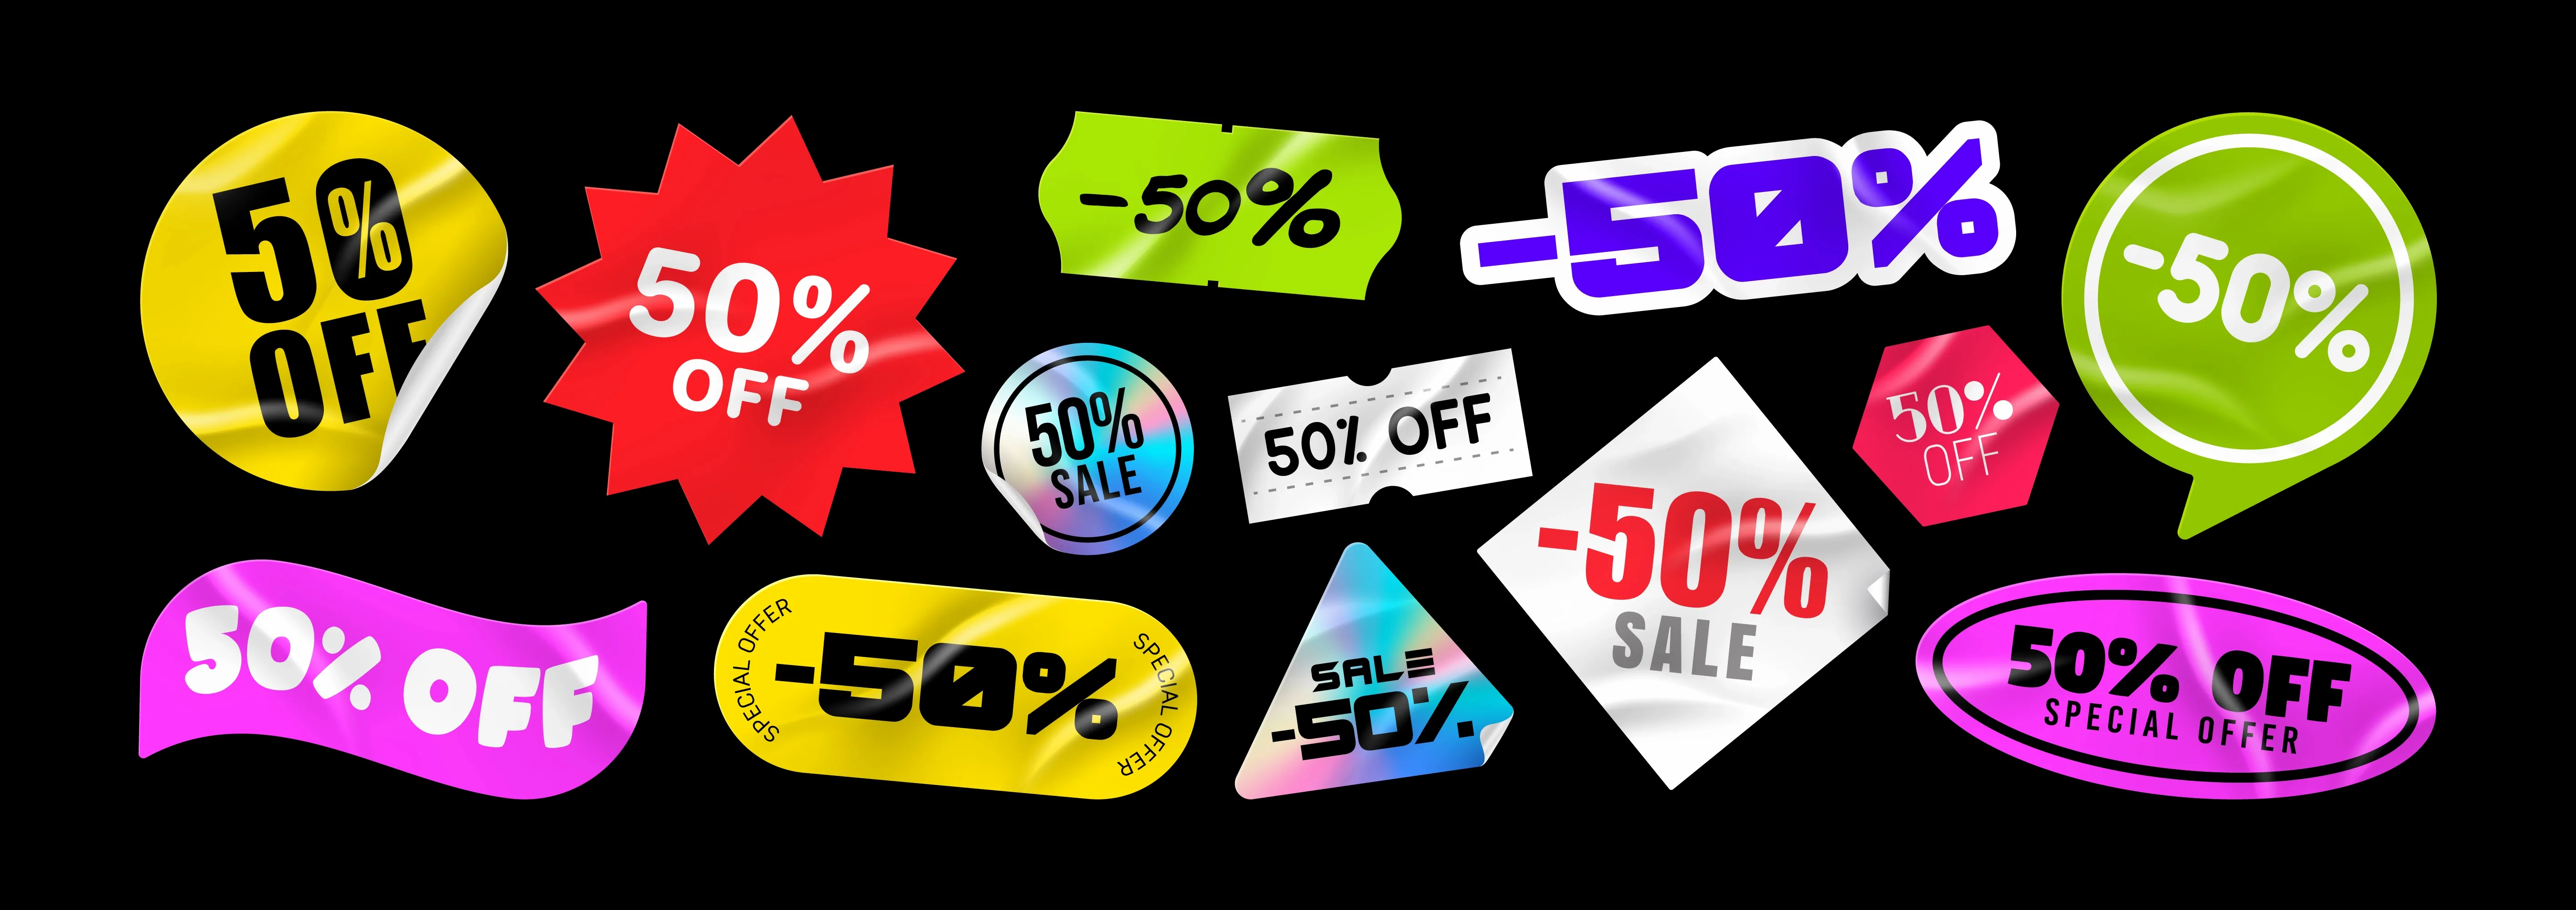 Sticker pack price stickers sale 50 off peeled paper stickers price tag isolated on black background